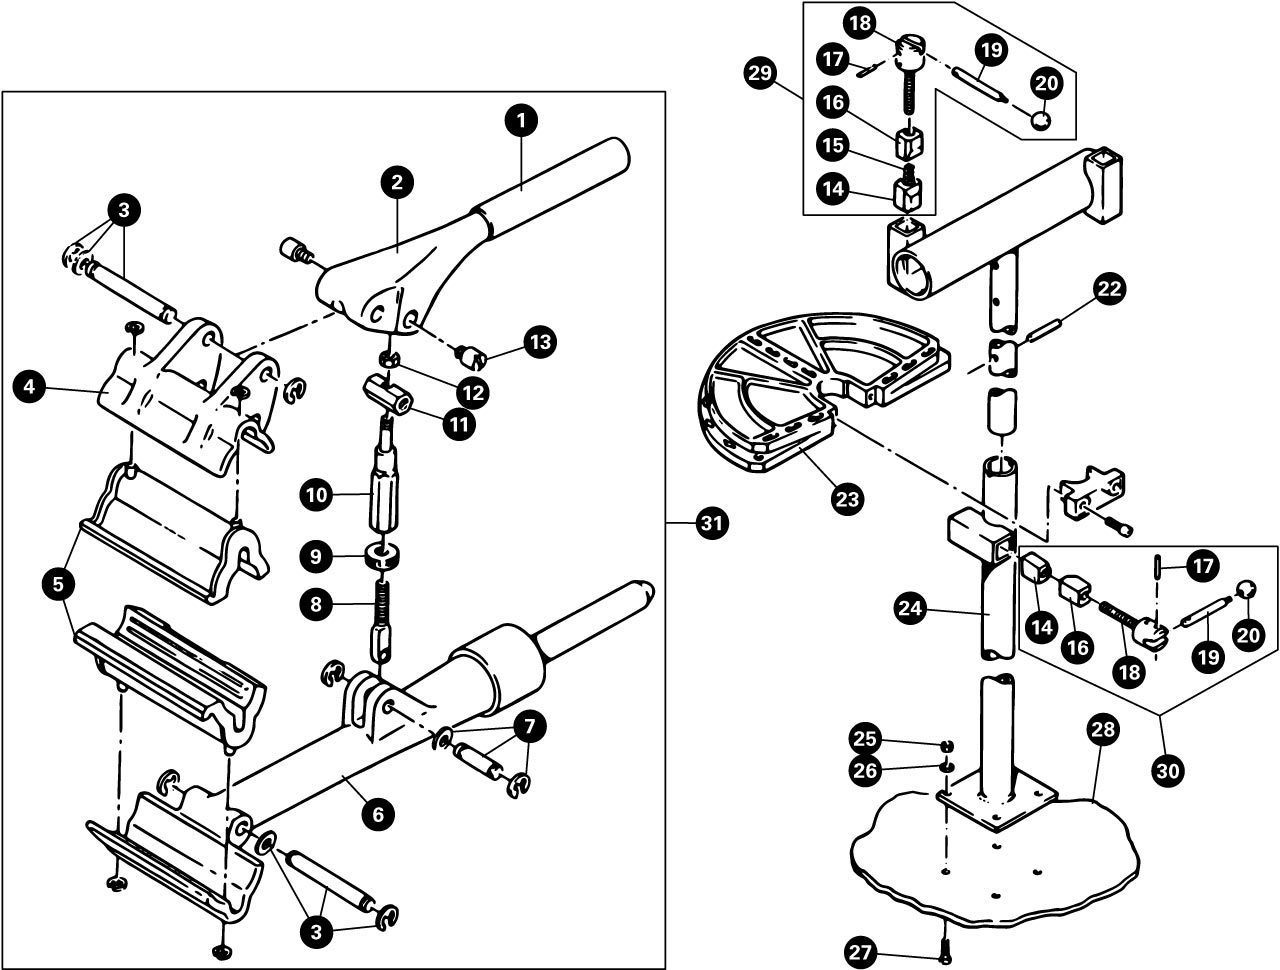 Parts diagram for PRS-2 Deluxe Double Arm Repair Stand, enlarged